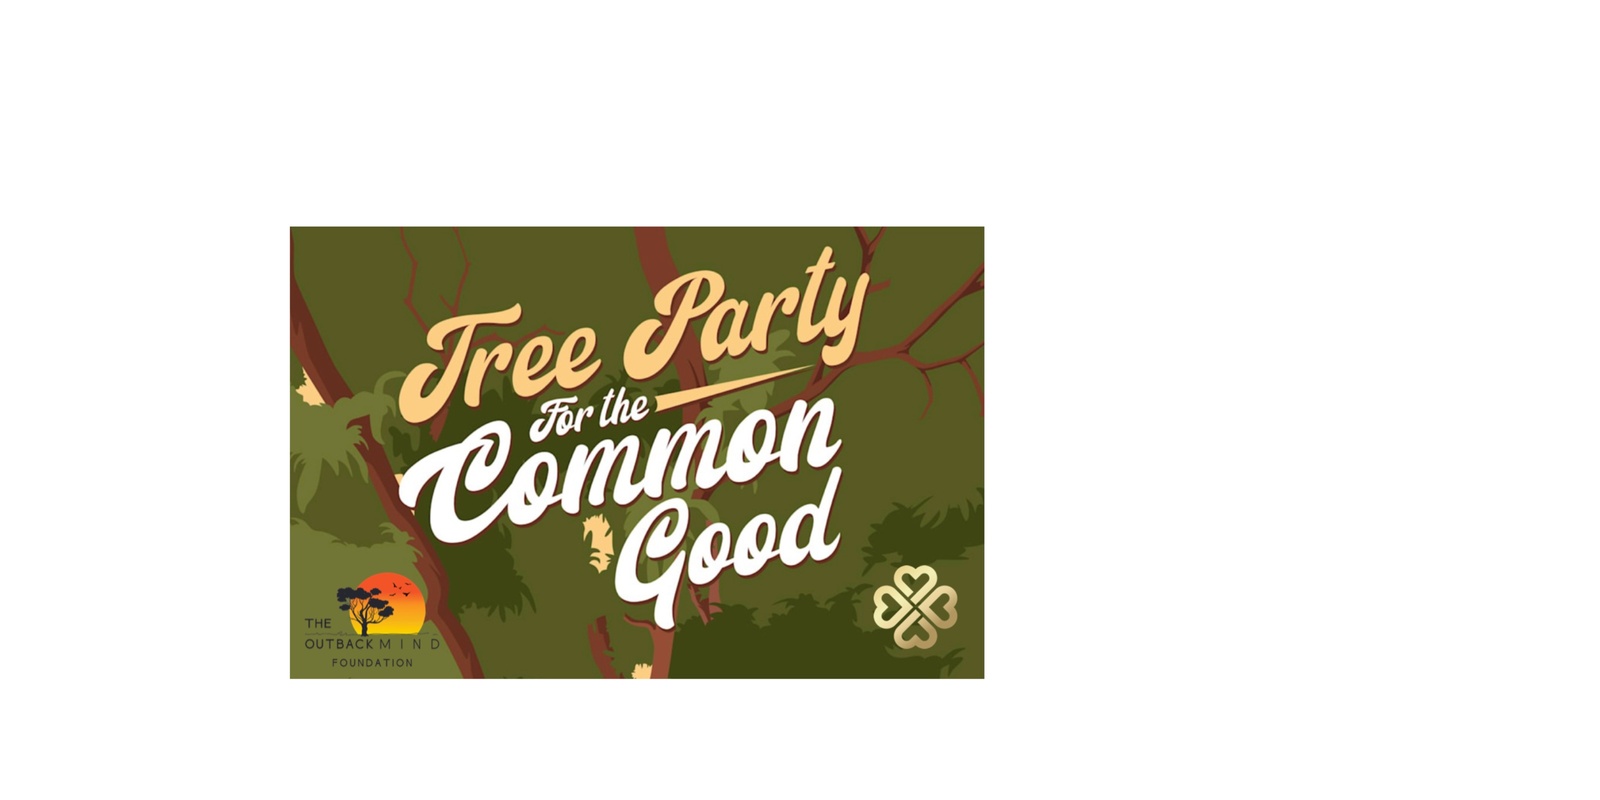 Banner image for “Treeparty for the Common Good”